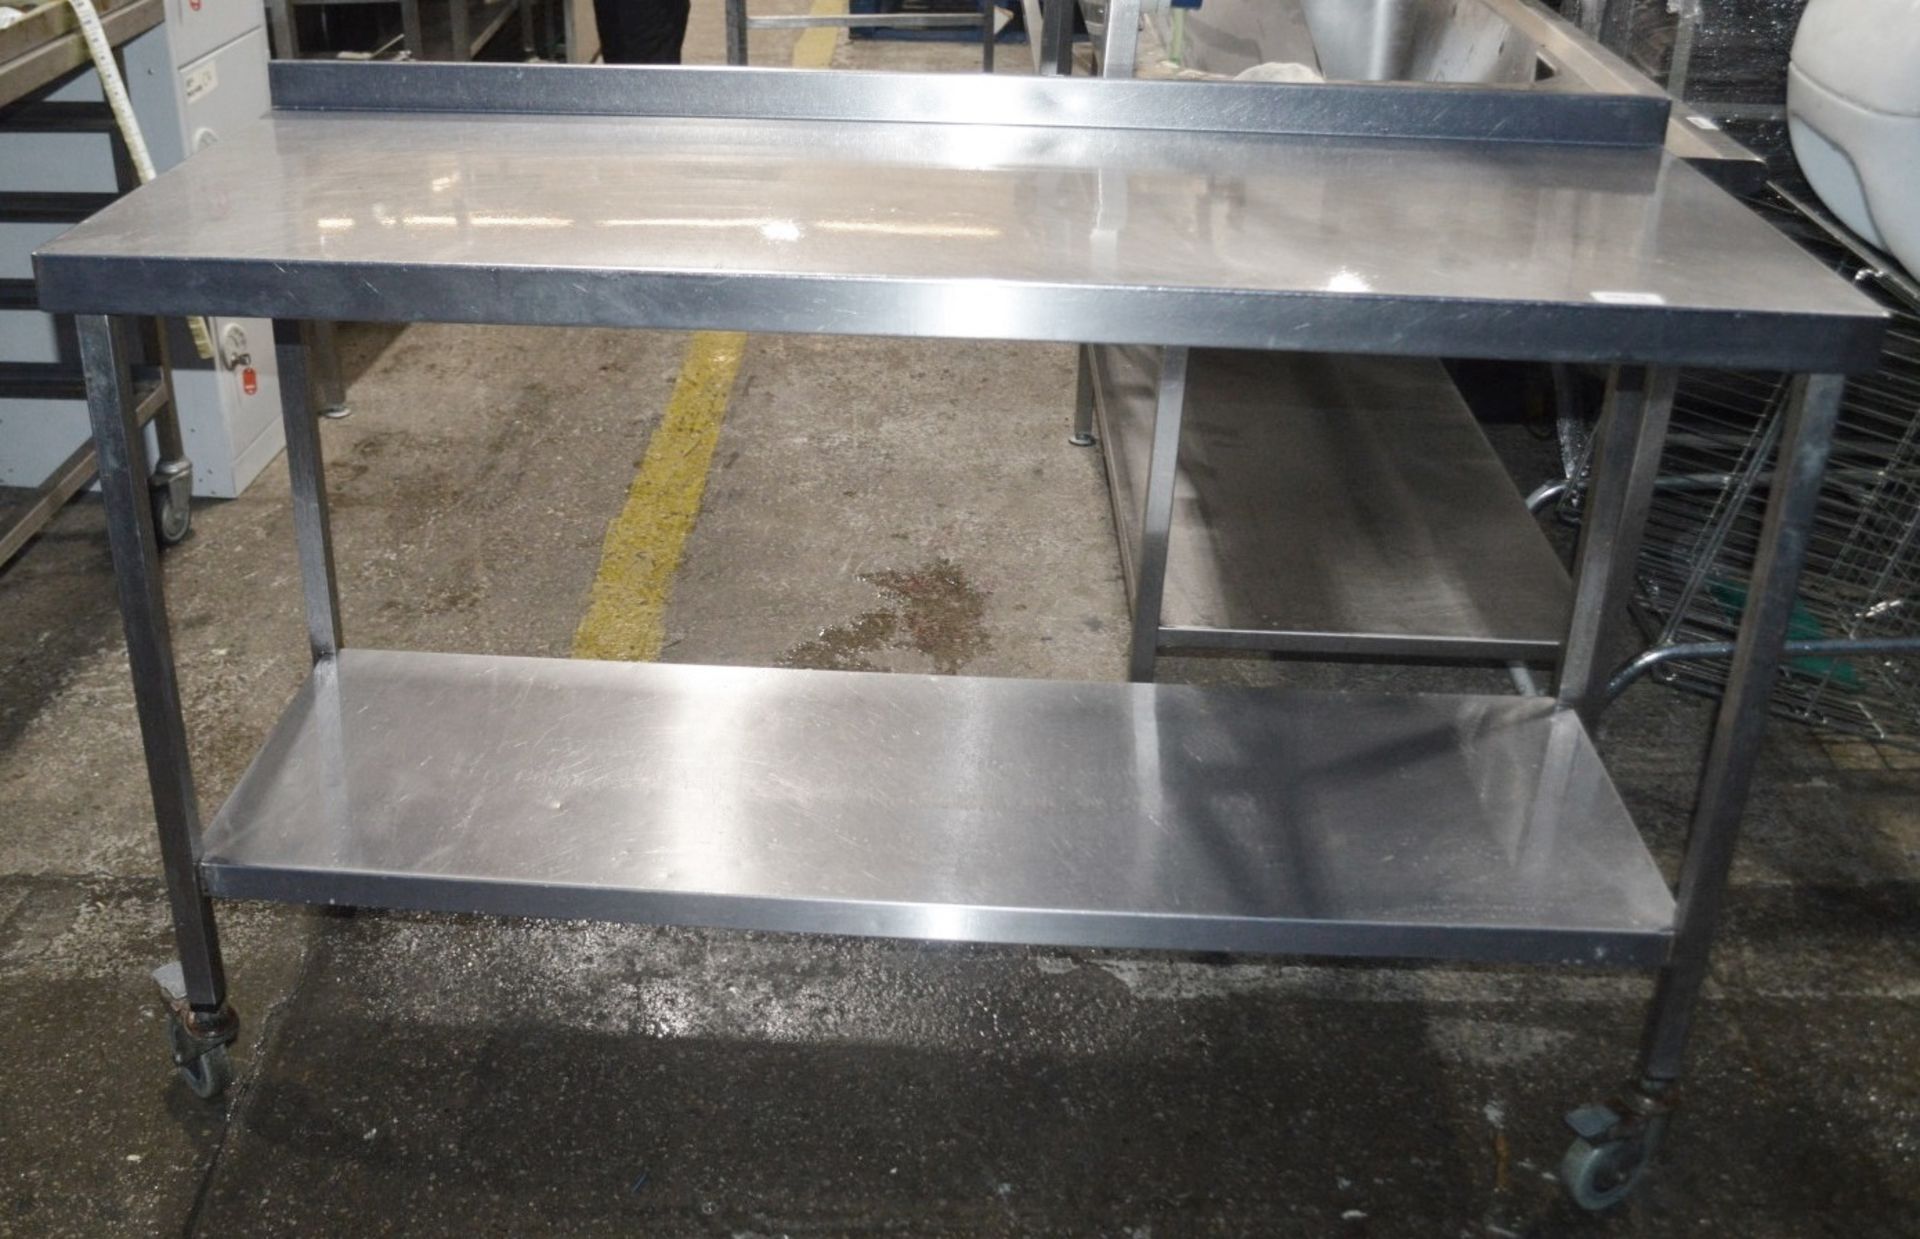 1 x Stainless Steel Commercial Kitchen Prep Bench - Dimensions: H95 x W150 x D60cm - Very Recently